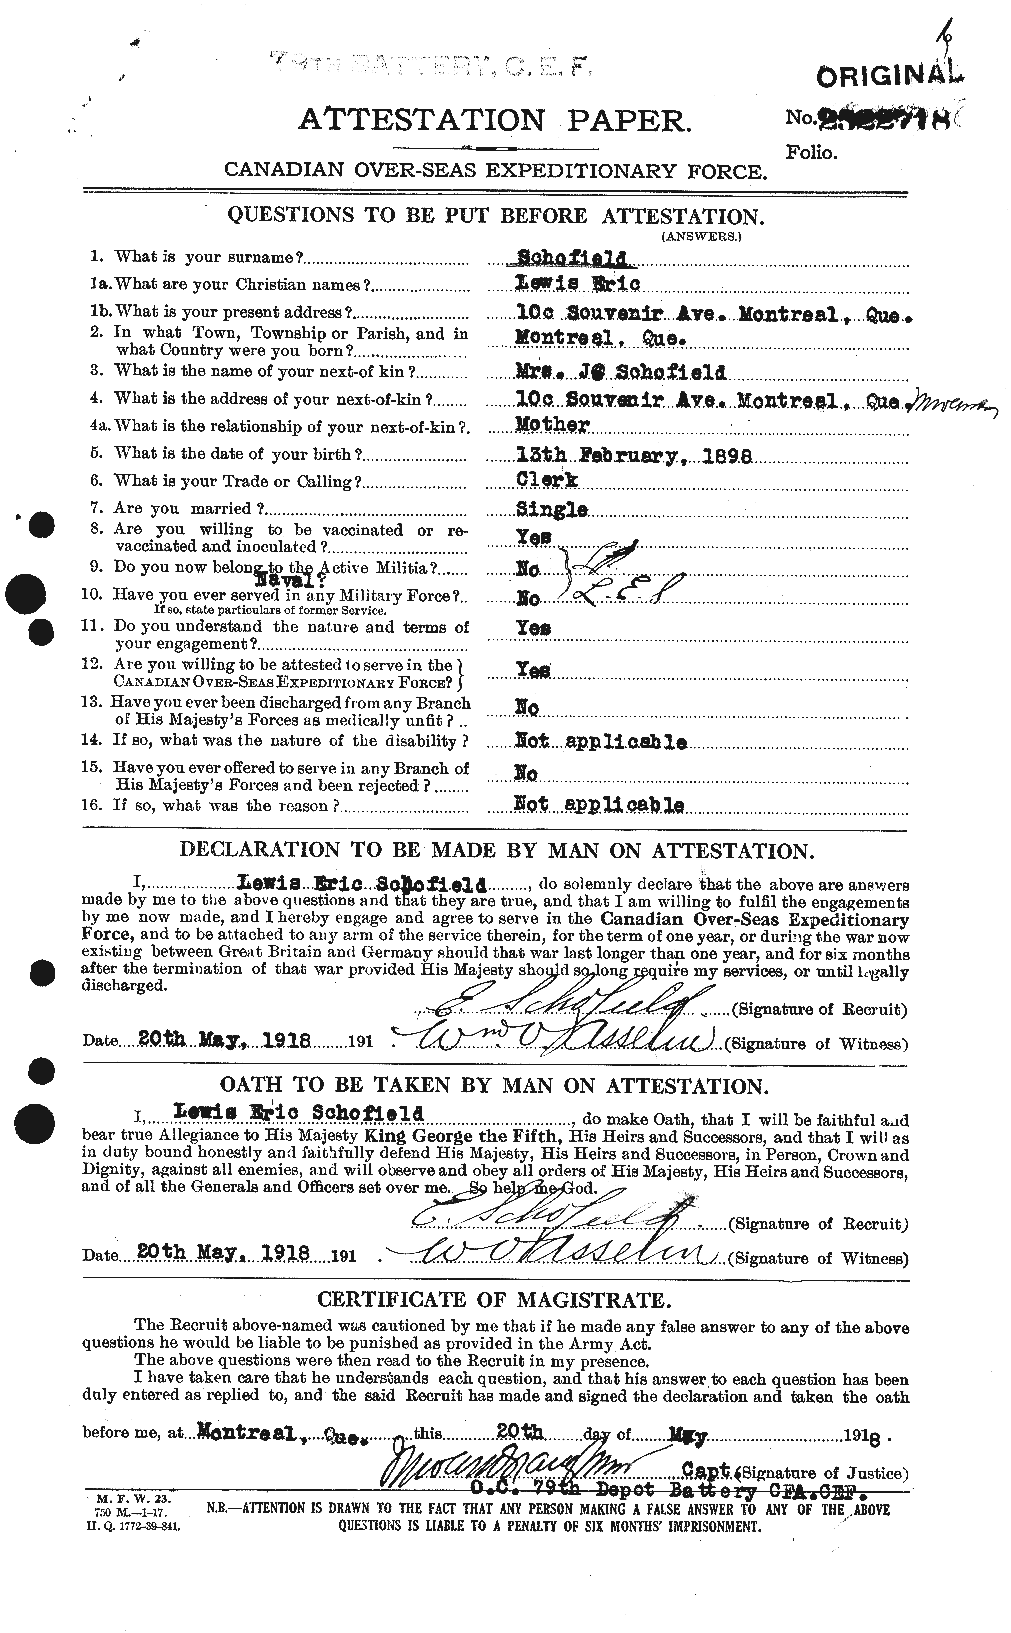 Personnel Records of the First World War - CEF 081067a